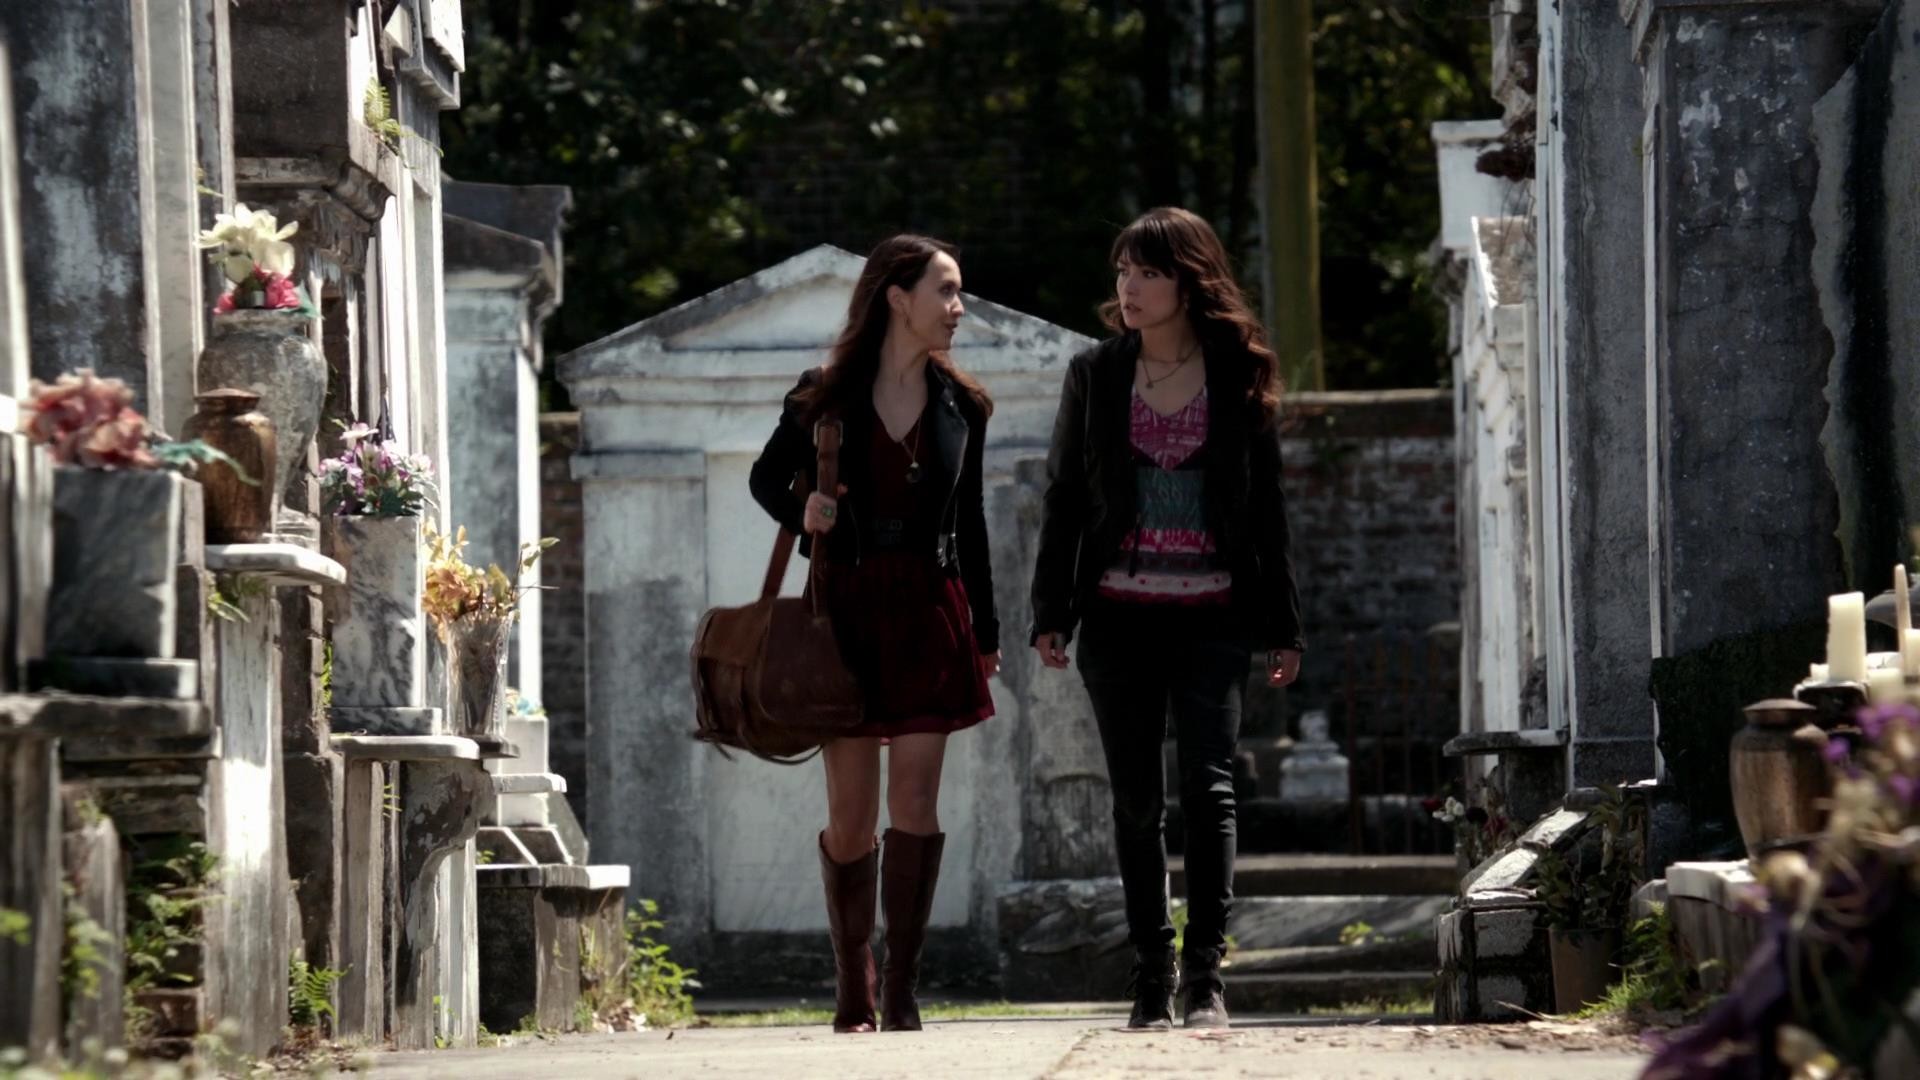 1920x1080 Jane-Anne and Sophie | The Vampire Diaries Wiki | FANDOM powered by Wikia